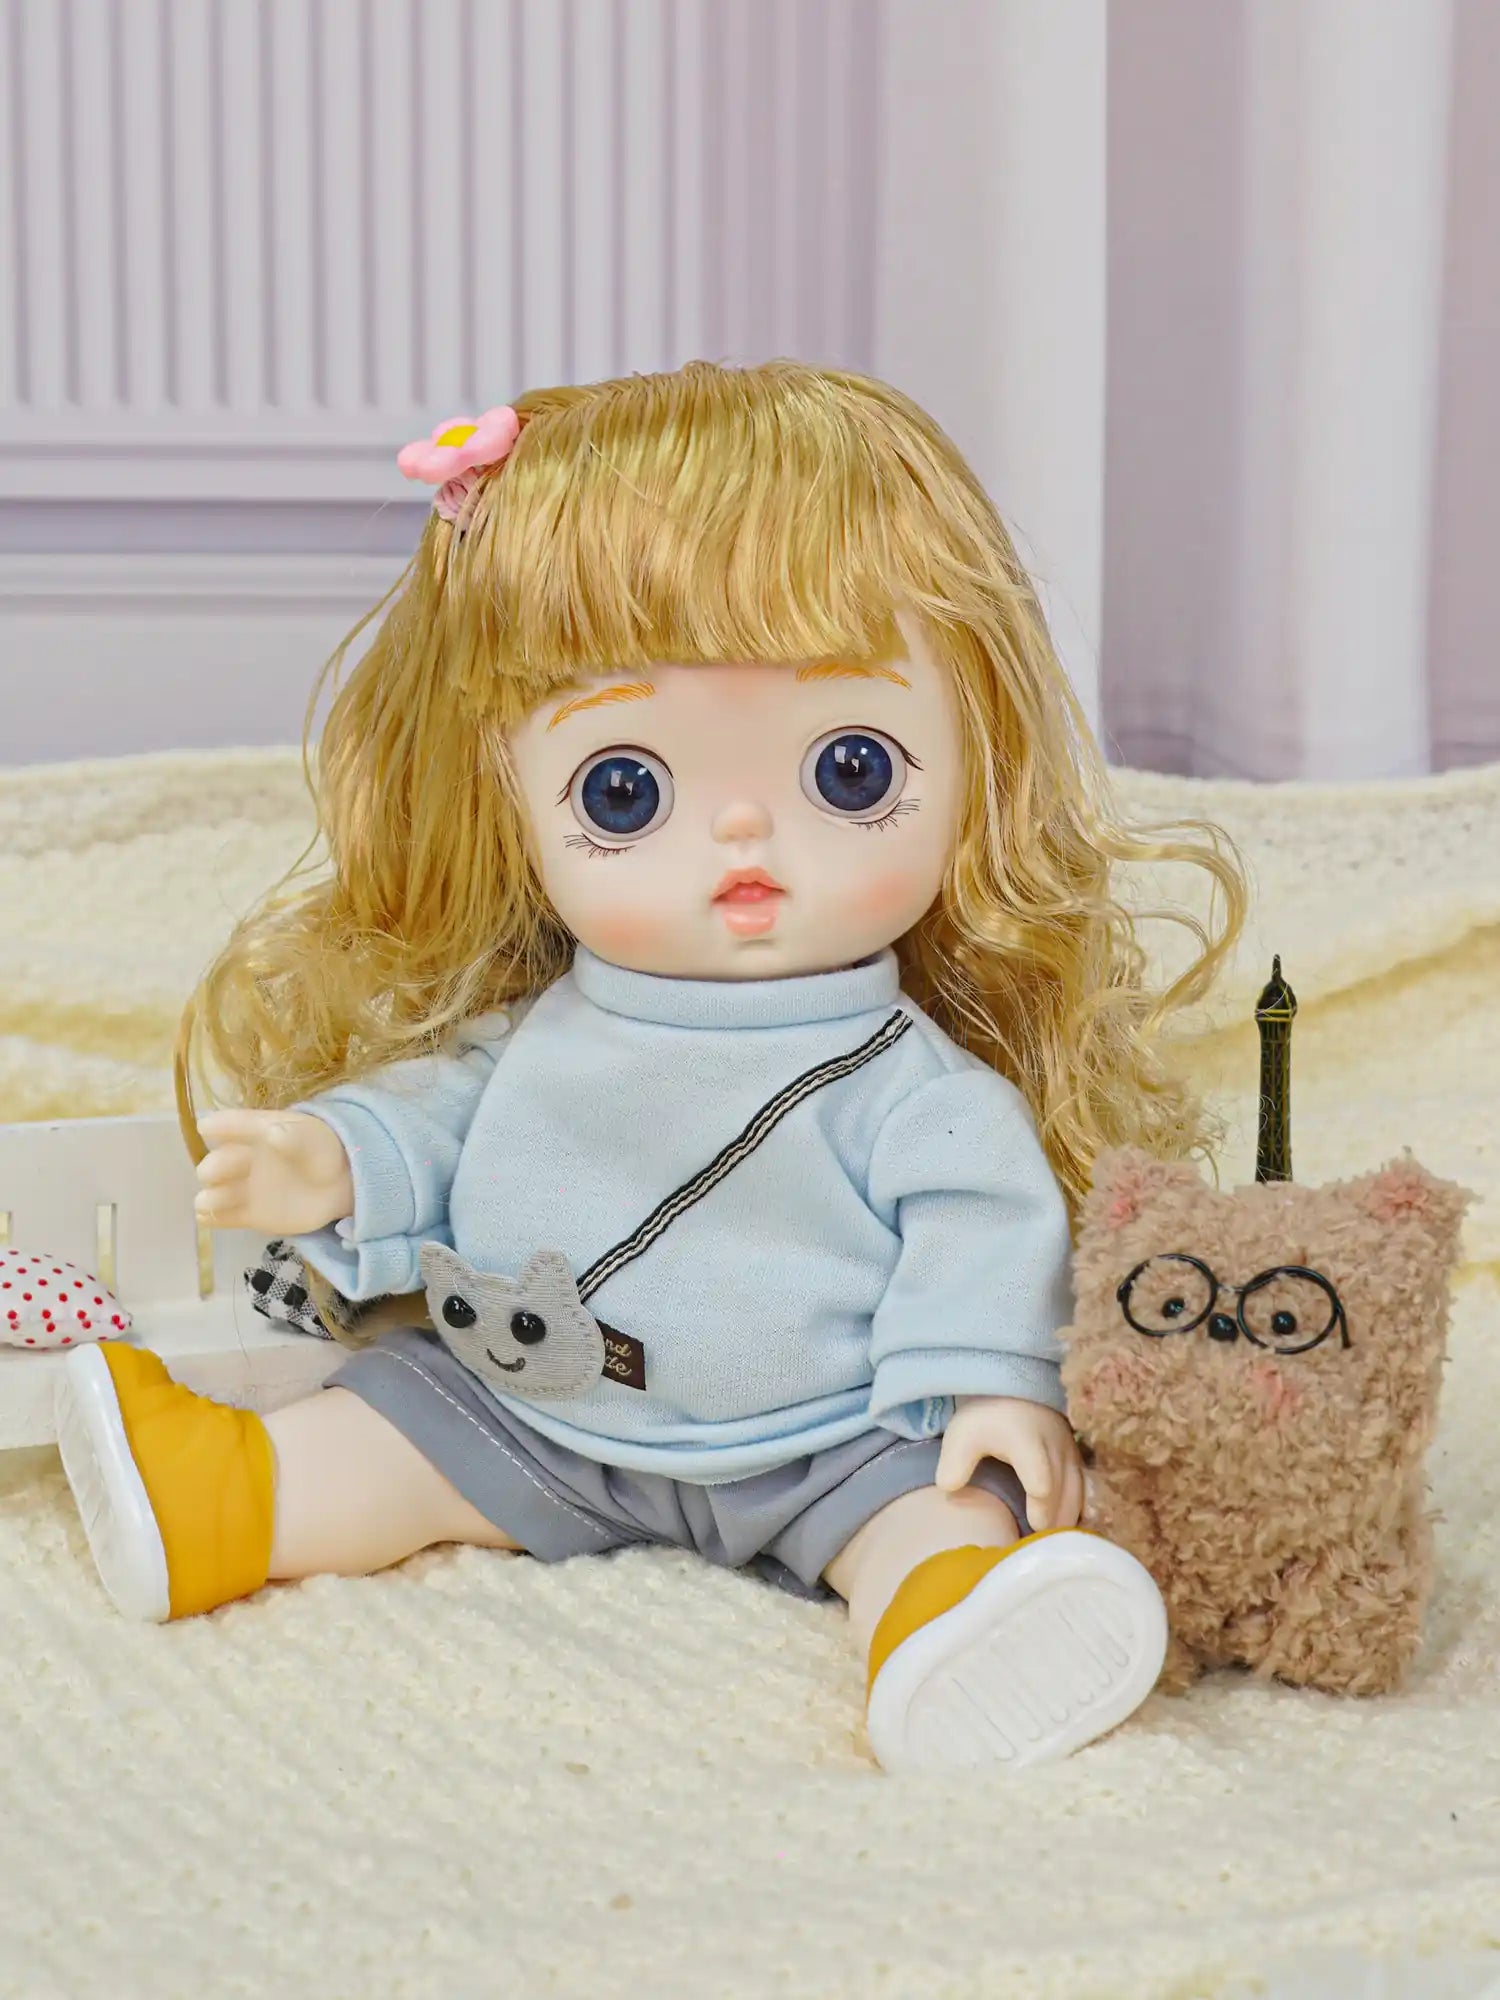 A playful doll with cheerful attire, including a crossbody animal bag, in a setup with a whimsical plush and toy décor.